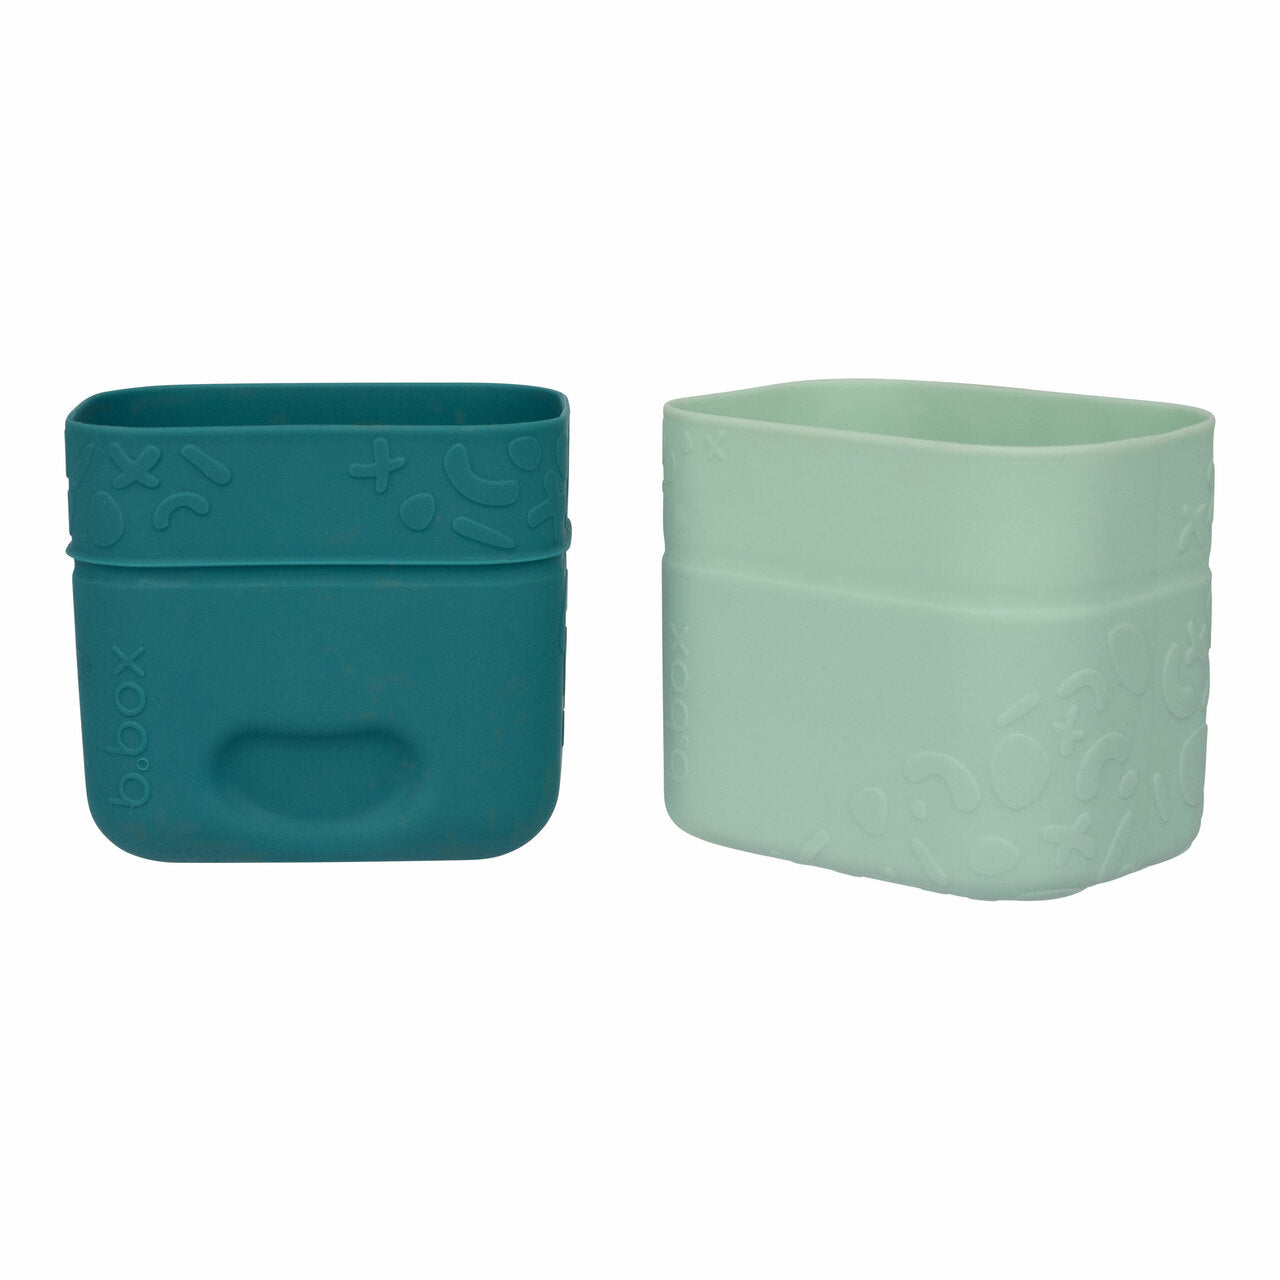 B.box Silicone Snack Cup in Forest available at Bear & Moo